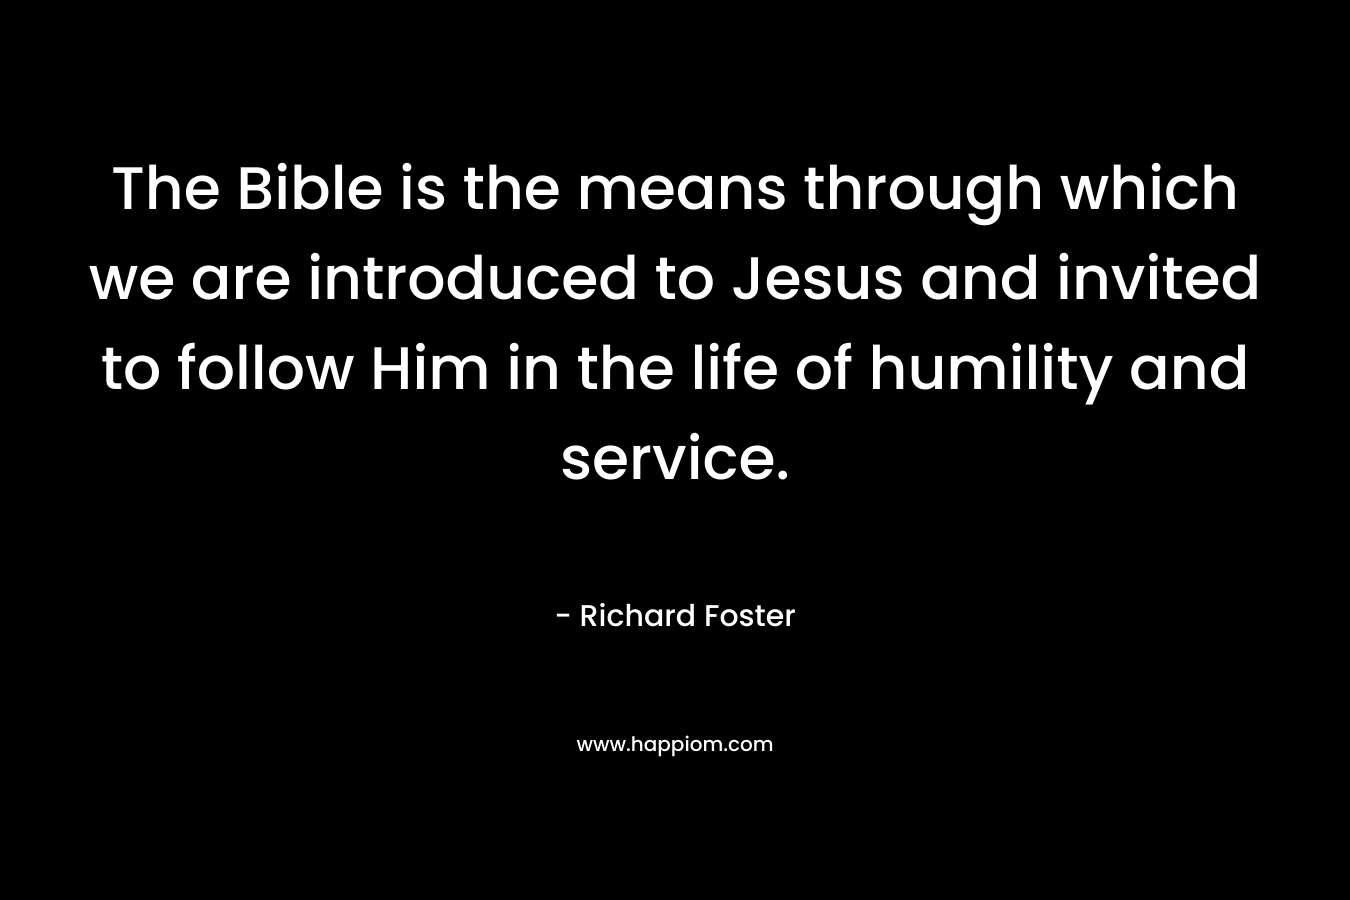 The Bible is the means through which we are introduced to Jesus and invited to follow Him in the life of humility and service. – Richard Foster